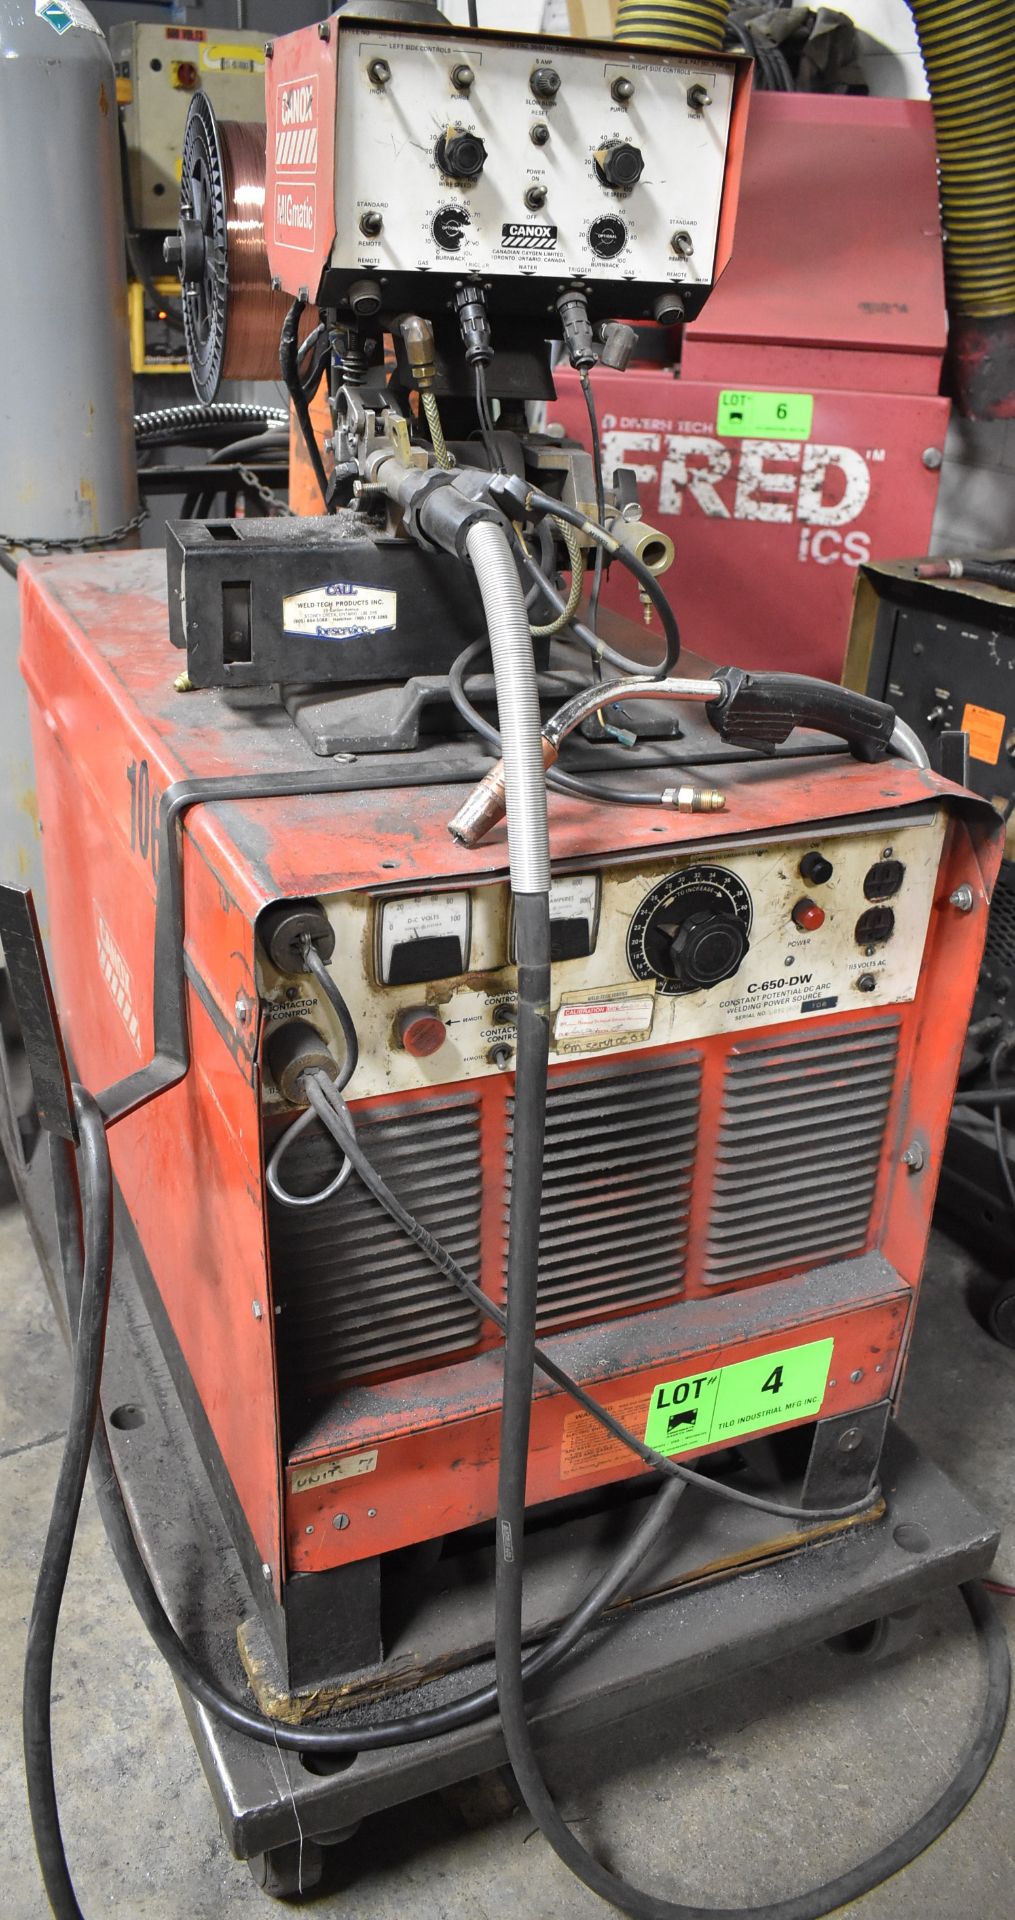 CANOX C-650-DW MIG WELDER WITH CANOX JA-47 TWIN REEL WIRE FEEDER, CABLES & GUN, S/N: UB525609 (NO